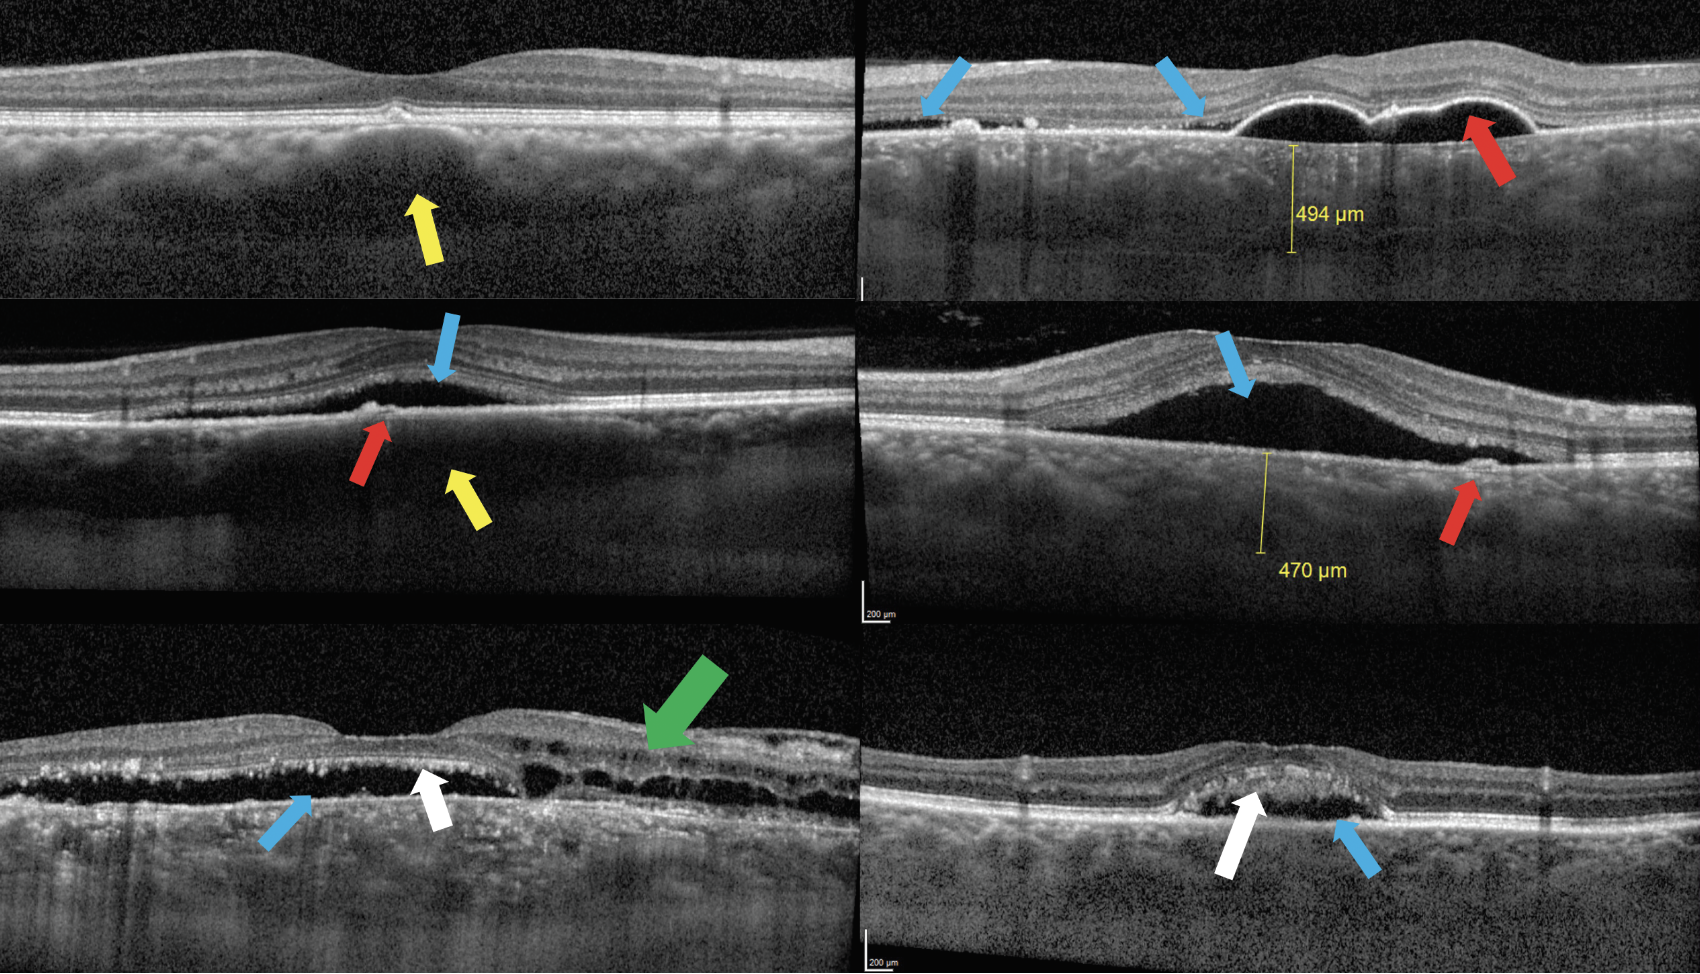 Fig. 11. Top left: Patient with pachydrusen overlying a pachyvessel (yellow arrow) with compression of Sattler’s layer and choriocapillaris. Top right: Patient with chronic case of CSR presents with pachychoroid, large serous PED (red arrow) and subretinal fluid (blue arrows). Middle left: Acute case of CSR presents with small PED (red arrow) and subretinal fluid (blue arrow) with underlying pachyvessel (yellow arrow) with compression of Sattler’s layer and choriocapillaris. Middle right: Acute case of CSR with pachychoroid, small PED (red arrow) and subretinal fluid (blue arrow). Bottom left and right: Chronic CSR presents with subretinal fluid (blue arrows) as well as intraretinal fluid (green arrow) and photoreceptor outer segment elongation or “shaggy photoreceptors” (white arrows).